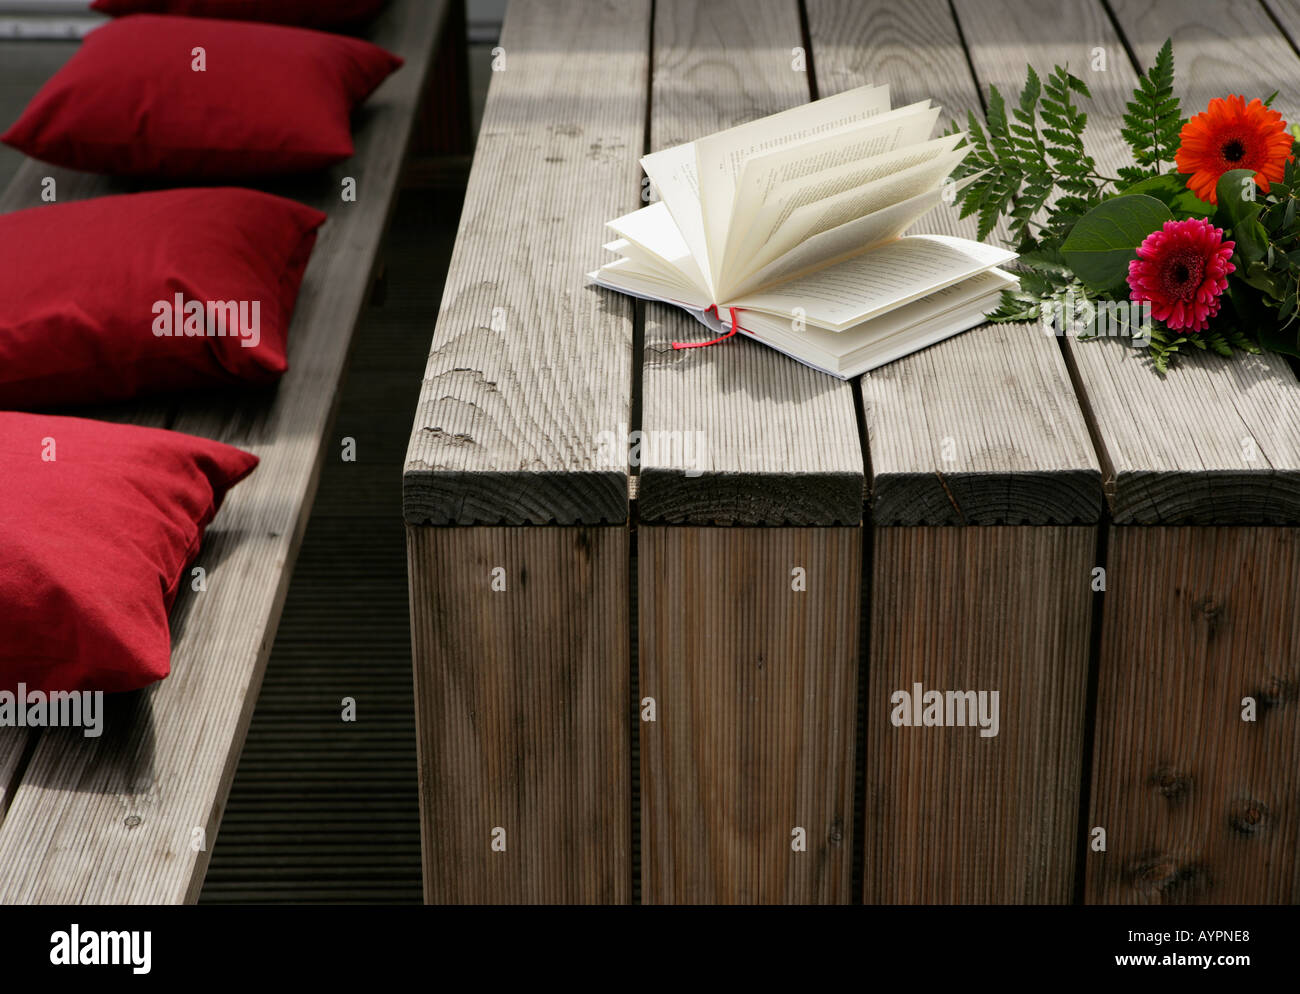 Bunch of flowers and a novel seen on a wooden table with some red cushions beside it Stock Photo